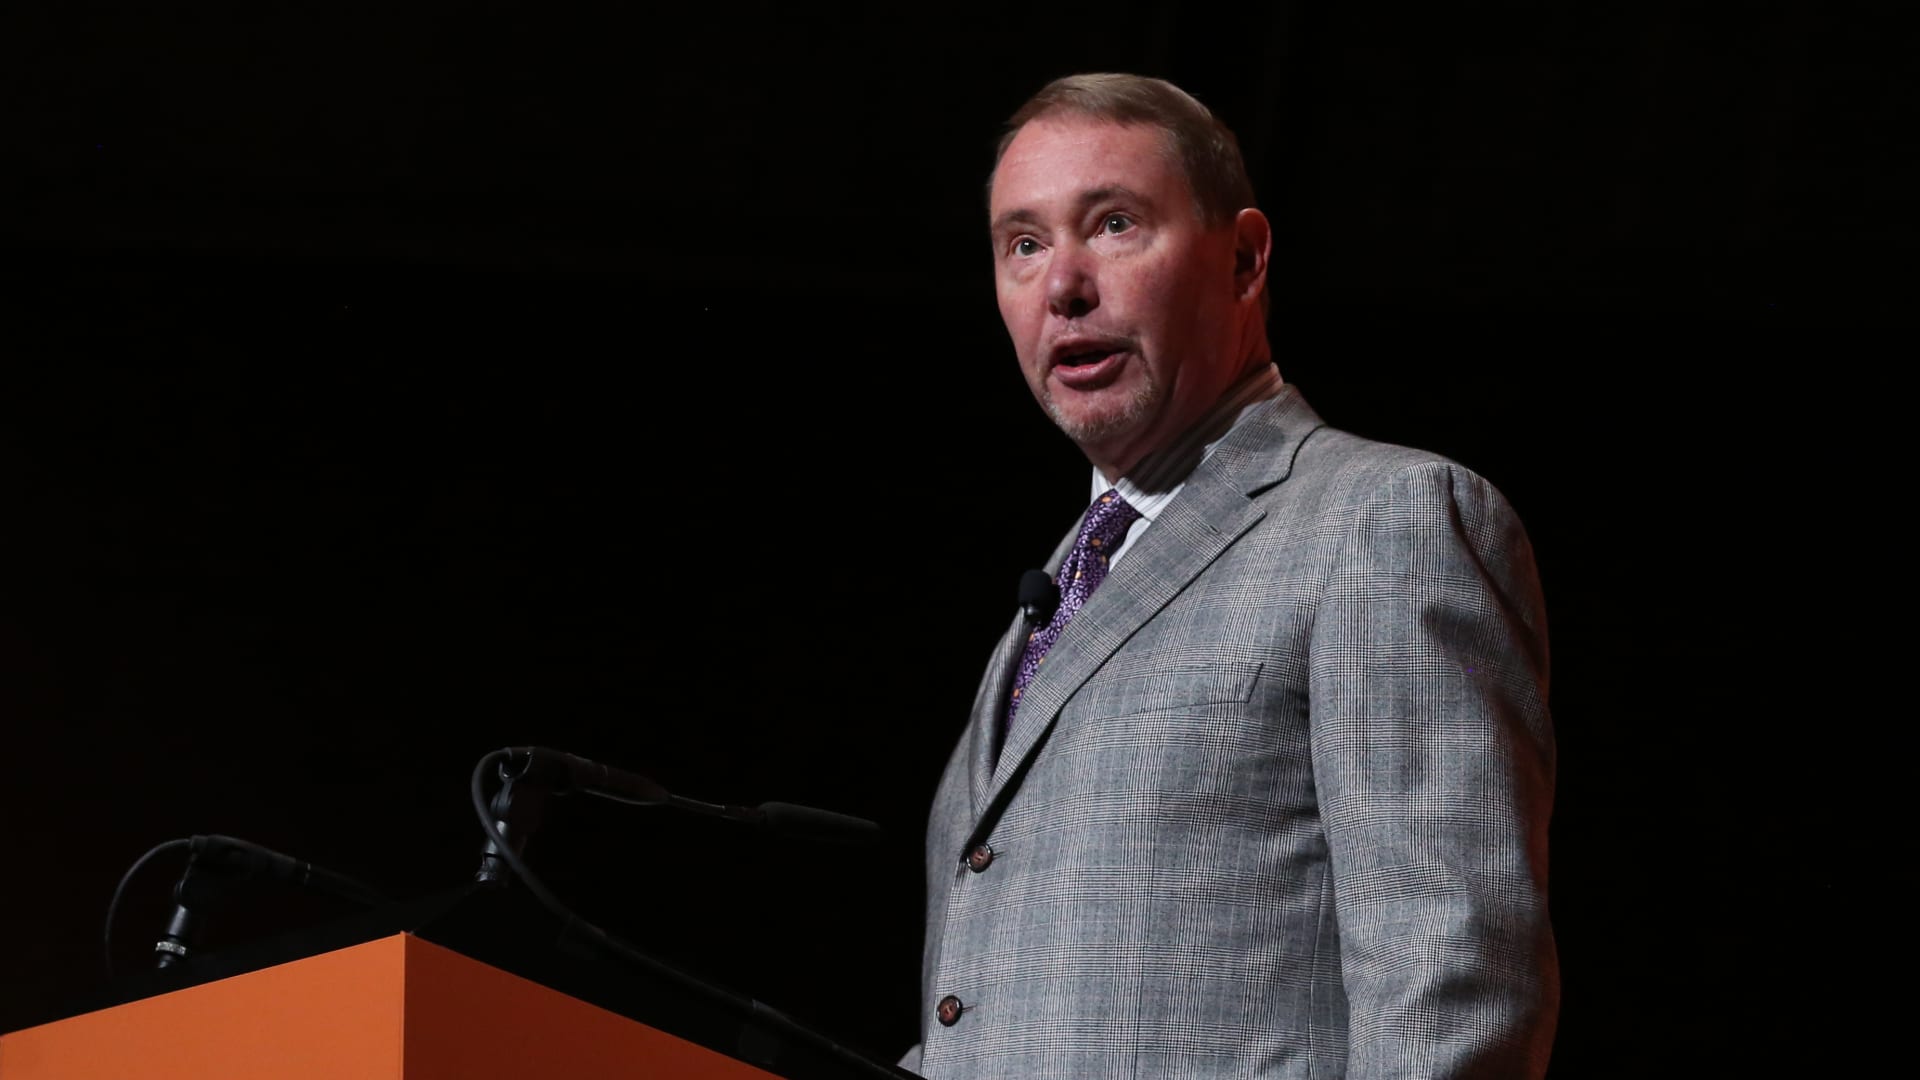 Here’s where billionaire investor Jeffrey Gundlach sees income opportunities as recession risk looms